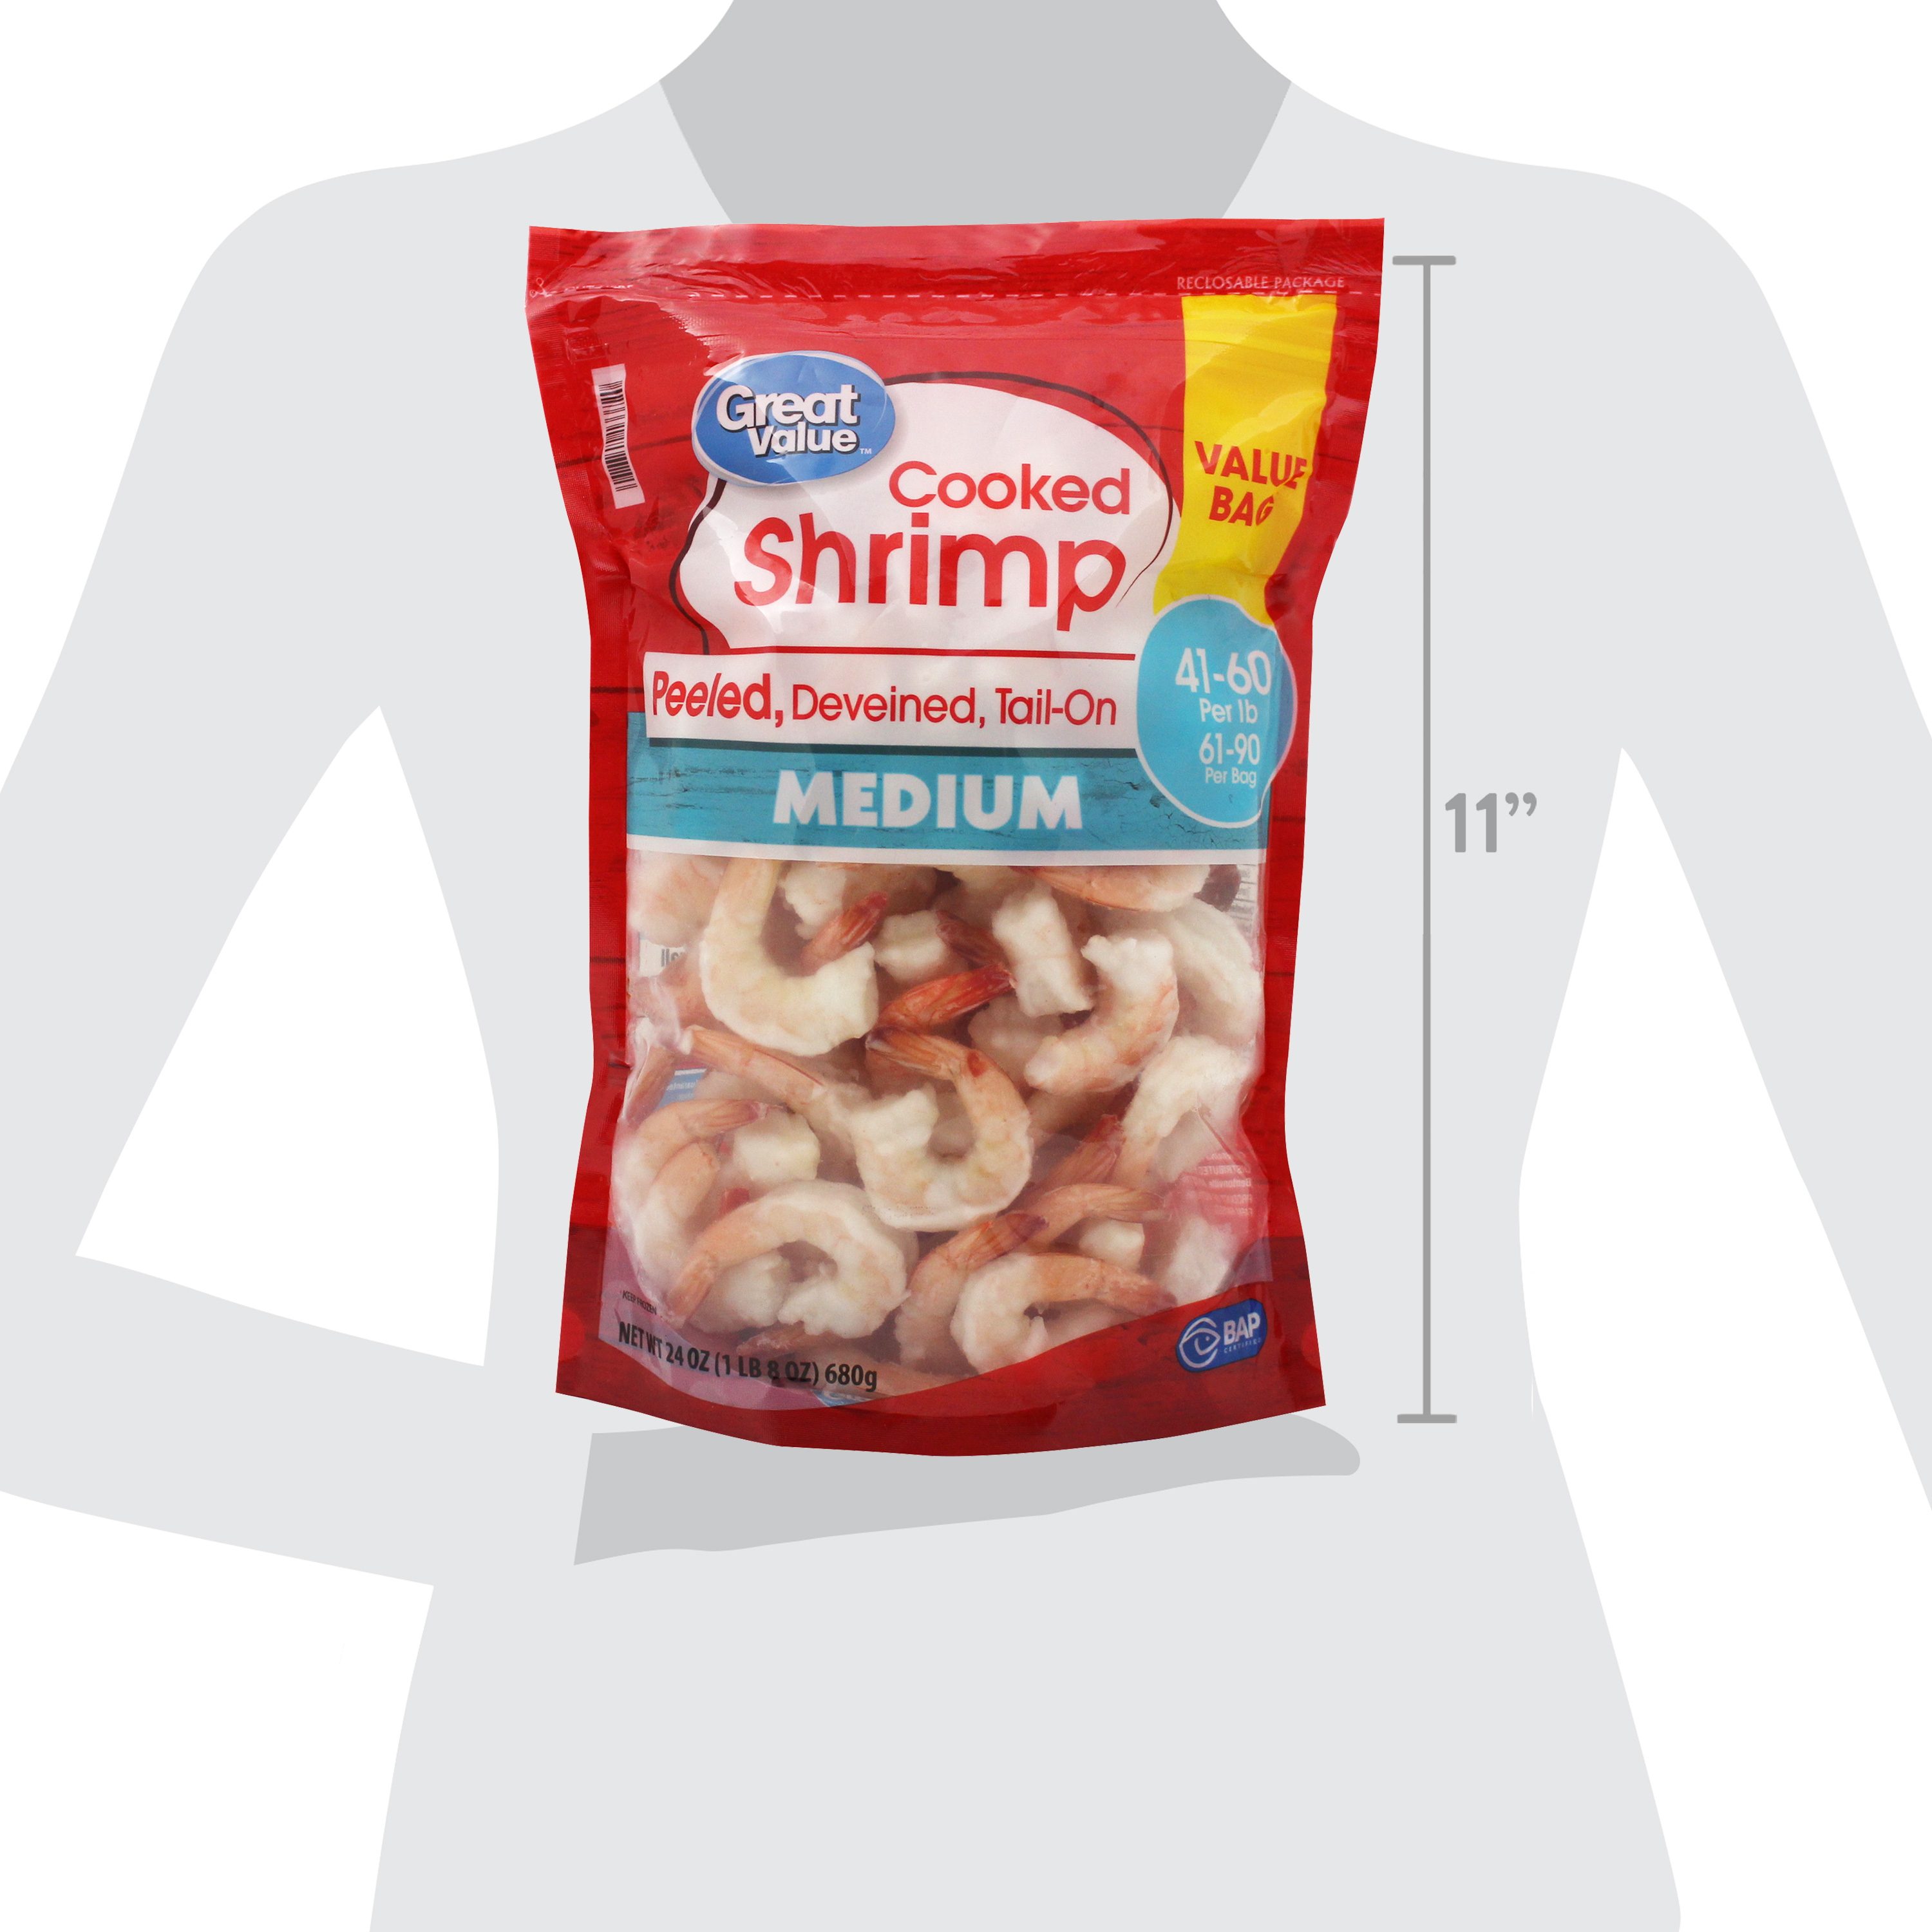 Great Value Frozen Cooked Medium Peeled Deveined Tail-On Shrimp, 24 oz Bag (41-60 count per lb) - image 9 of 10